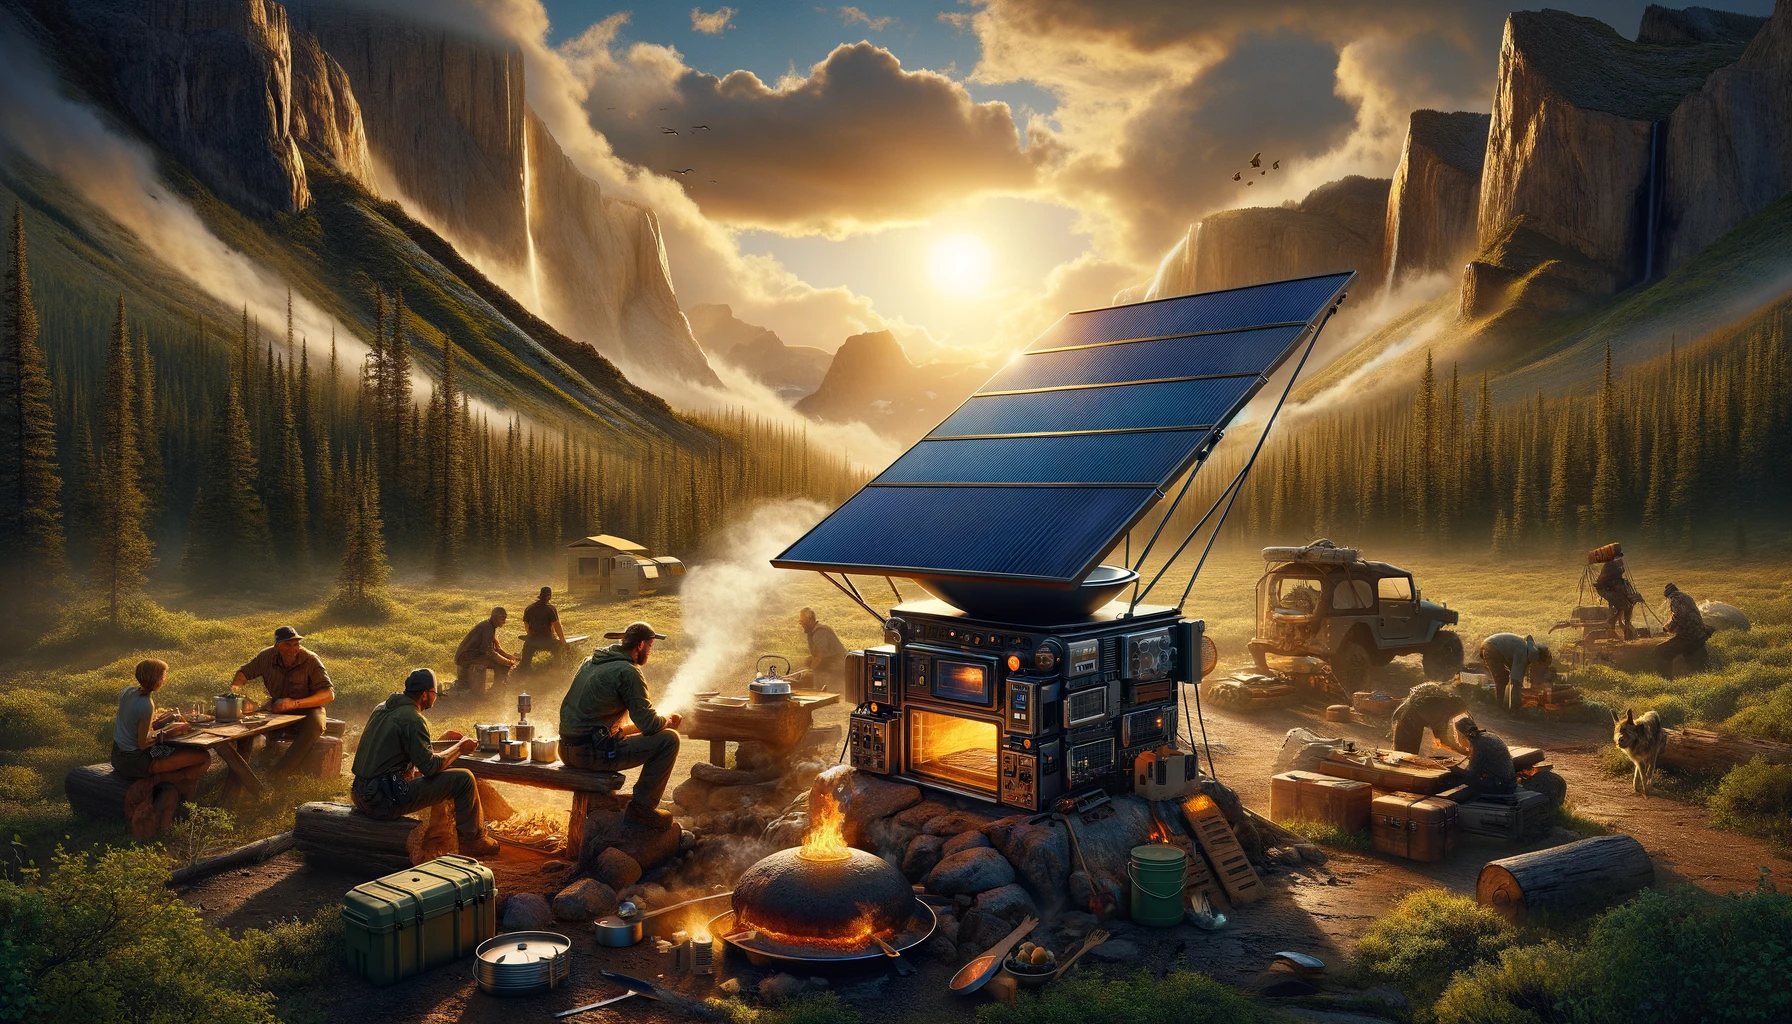 Remote wilderness scene with a group of preppers using a robust solar oven, crafted from sustainable materials, for off-grid cooking, highlighted by the golden light of the setting sun, demonstrating independence and resilience